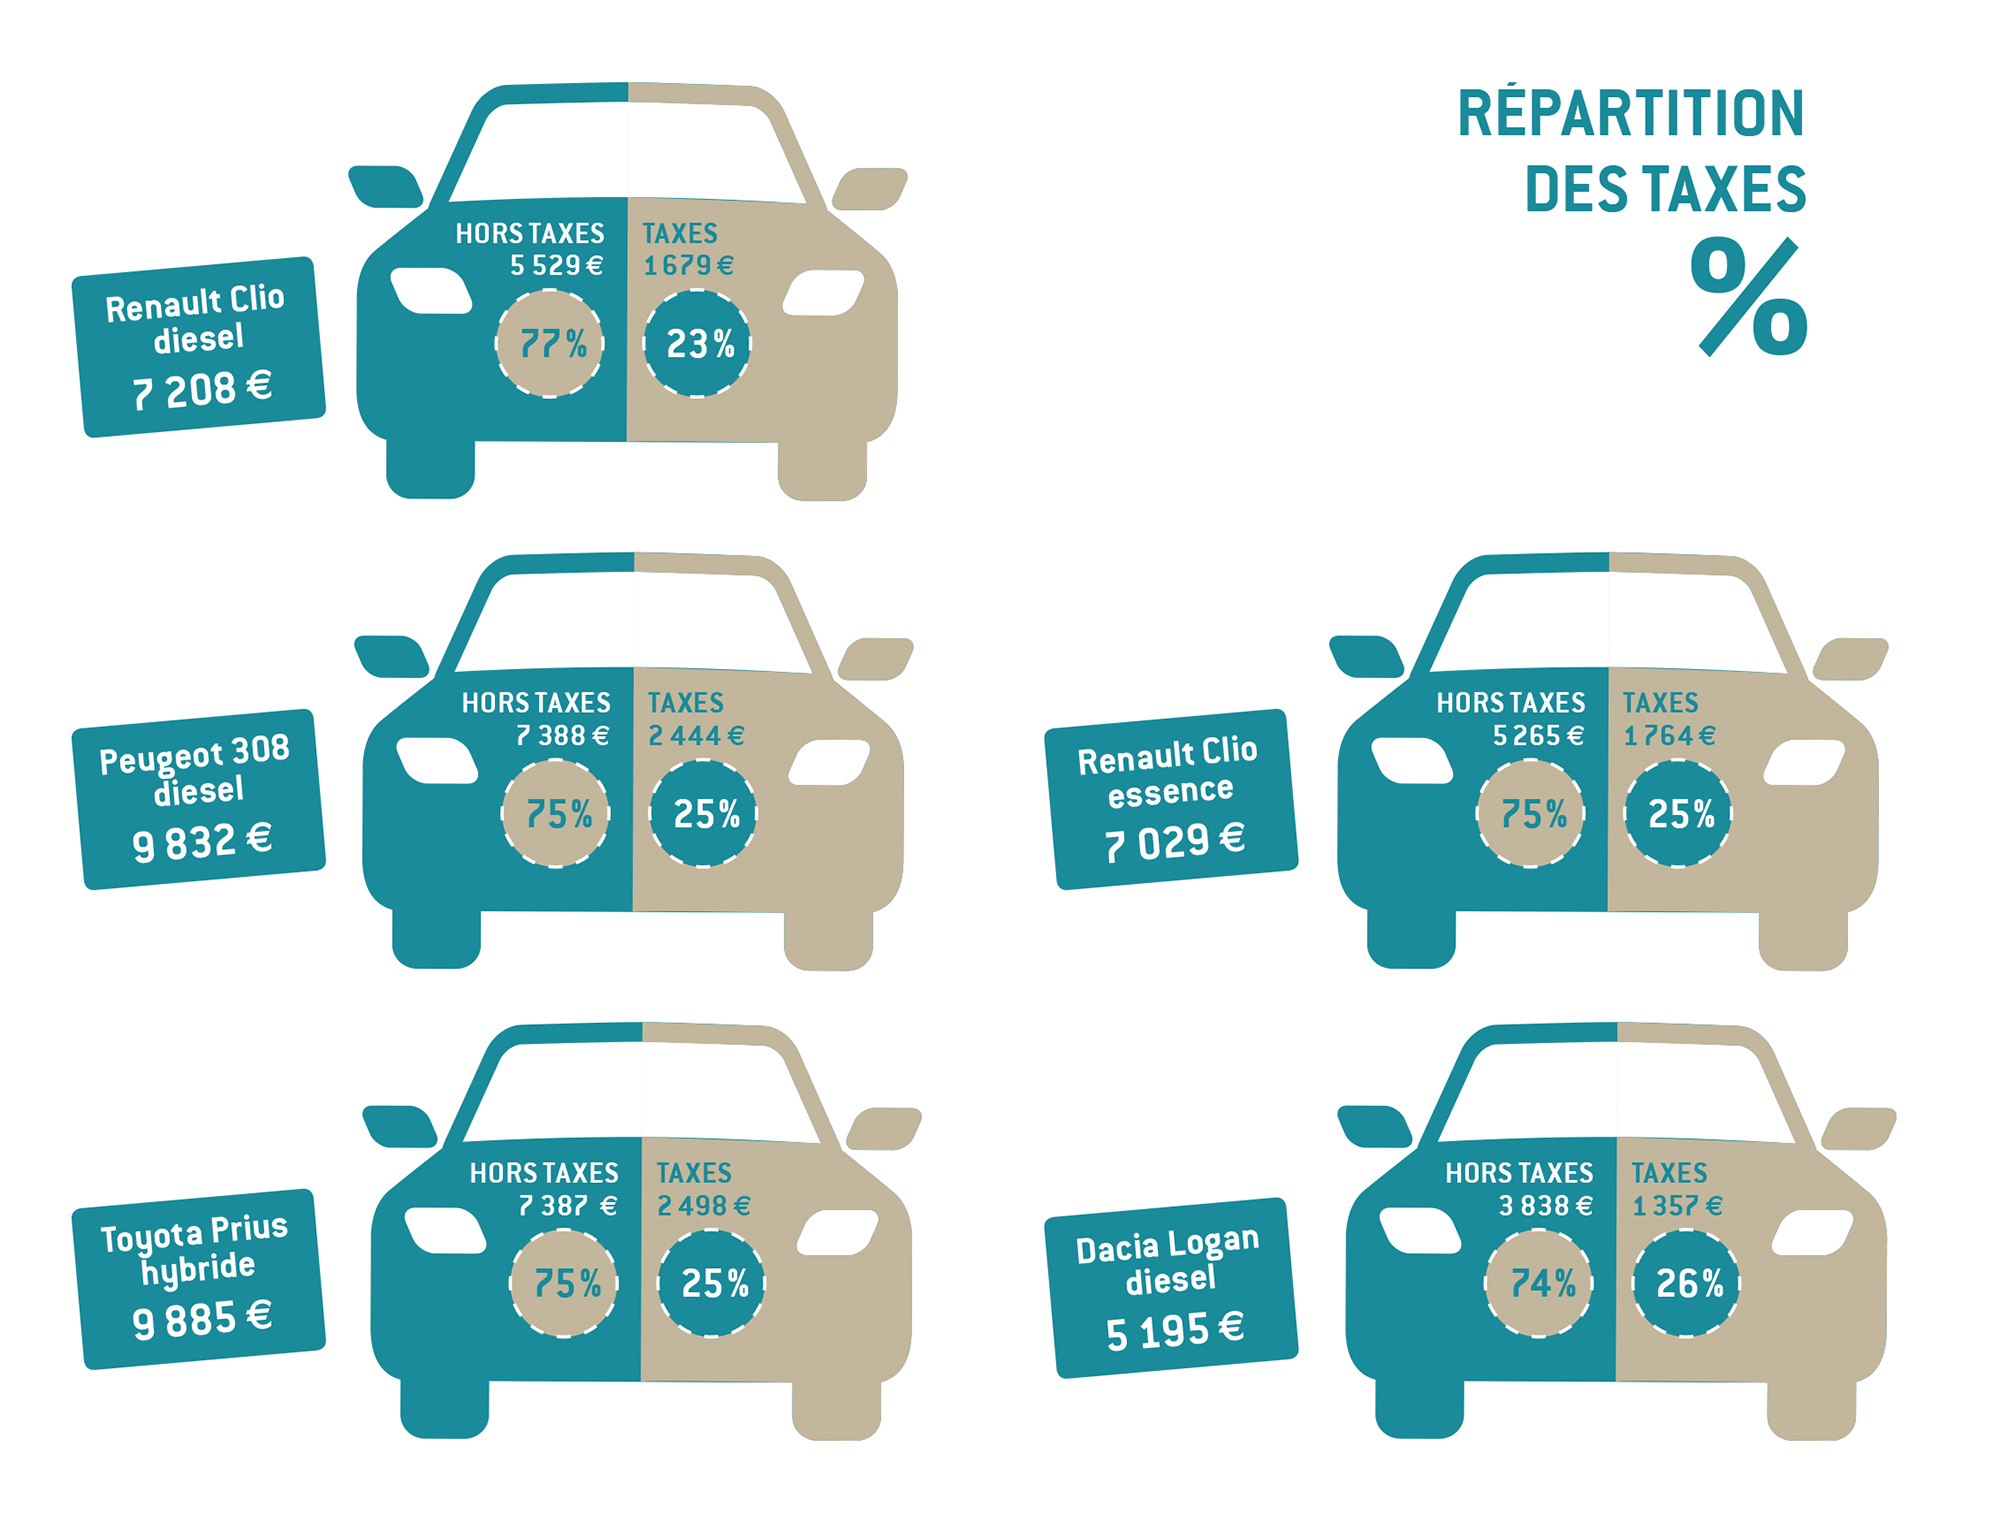 REPARTITION TAXES 2019